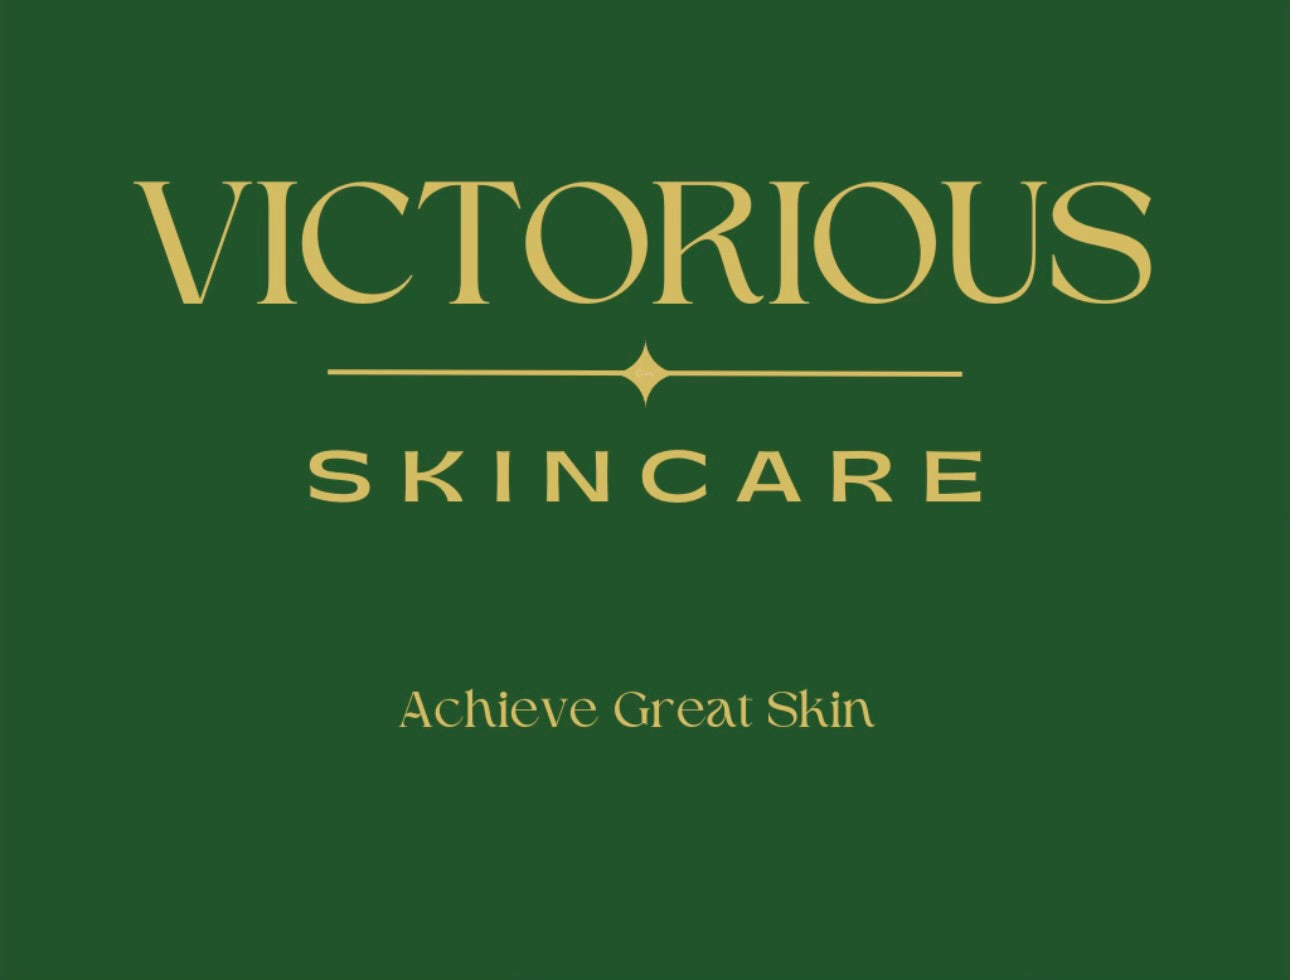 Victorious Skincare – Victorious SkinCare